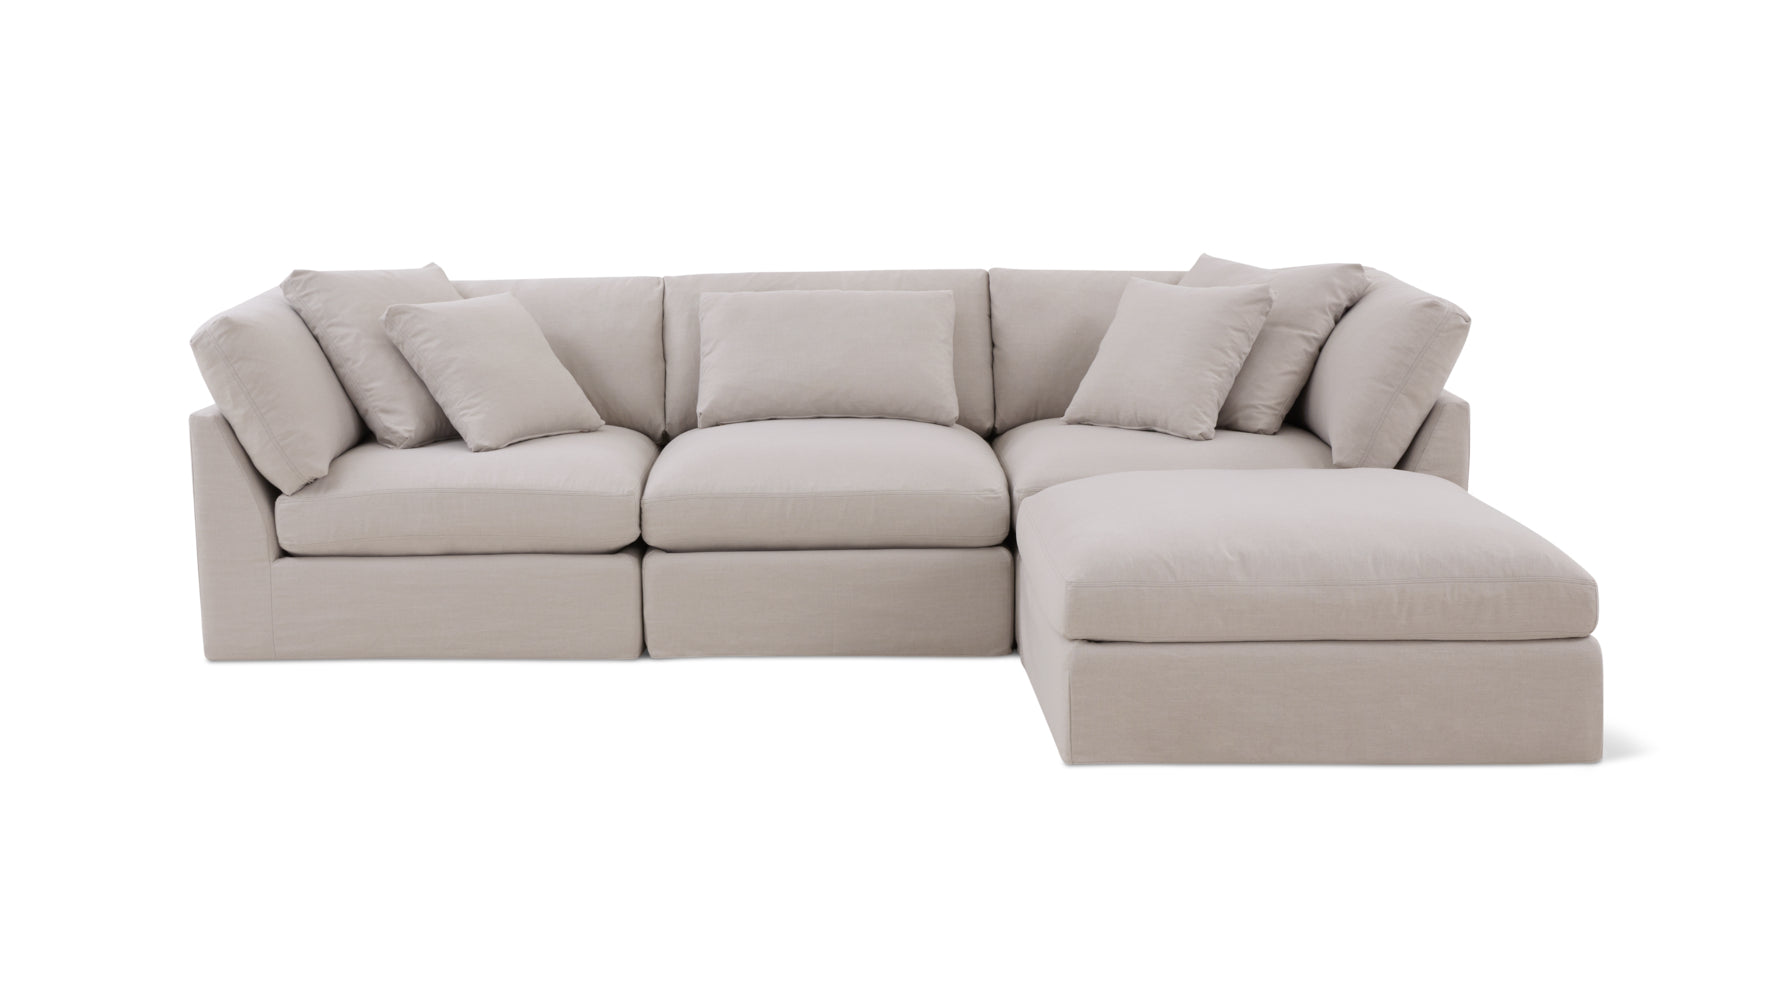 Get Together™ 4-Piece Modular Sectional, Large, Clay - Image 1